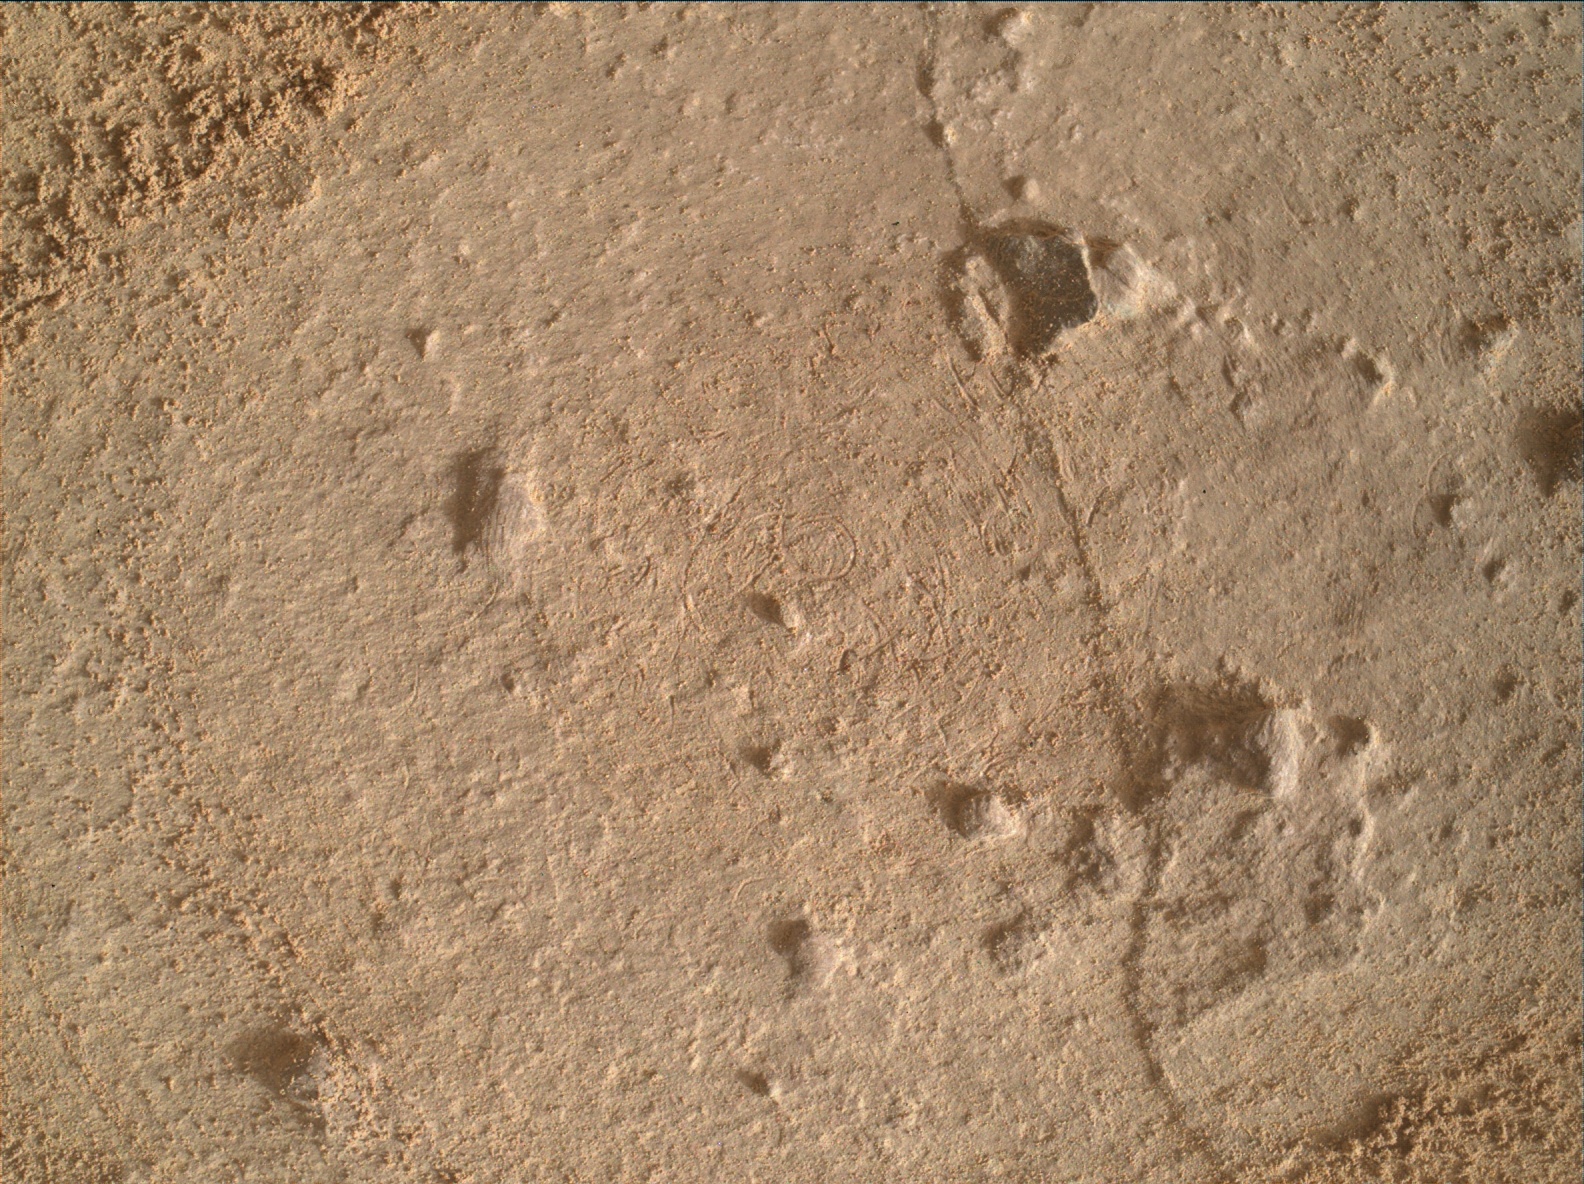 Nasa's Mars rover Curiosity acquired this image using its Mars Hand Lens Imager (MAHLI) on Sol 1457